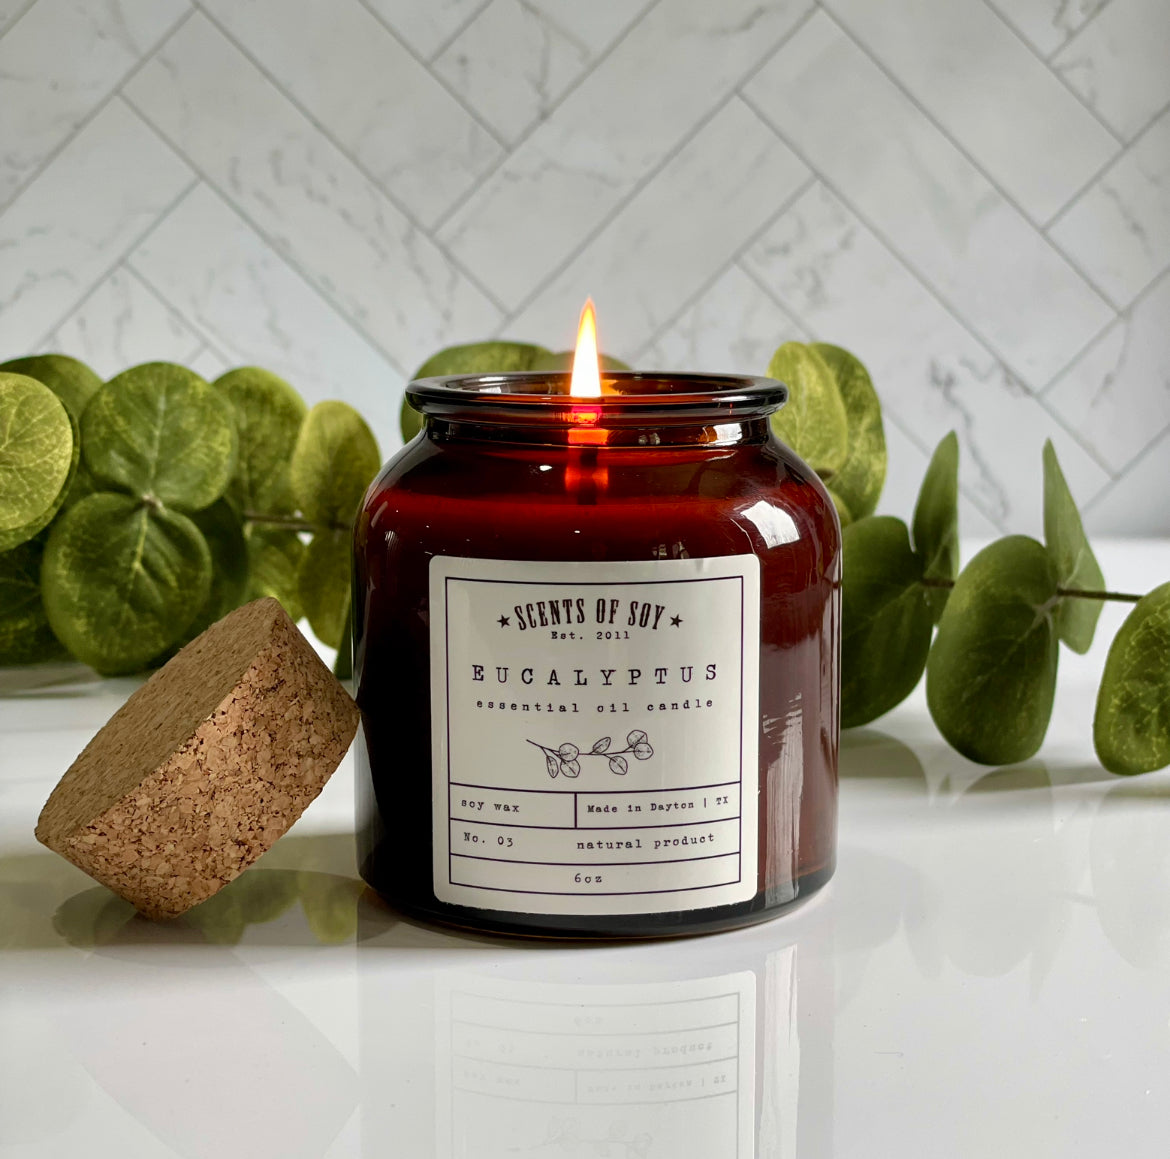 Scents of Soy Candle Co.